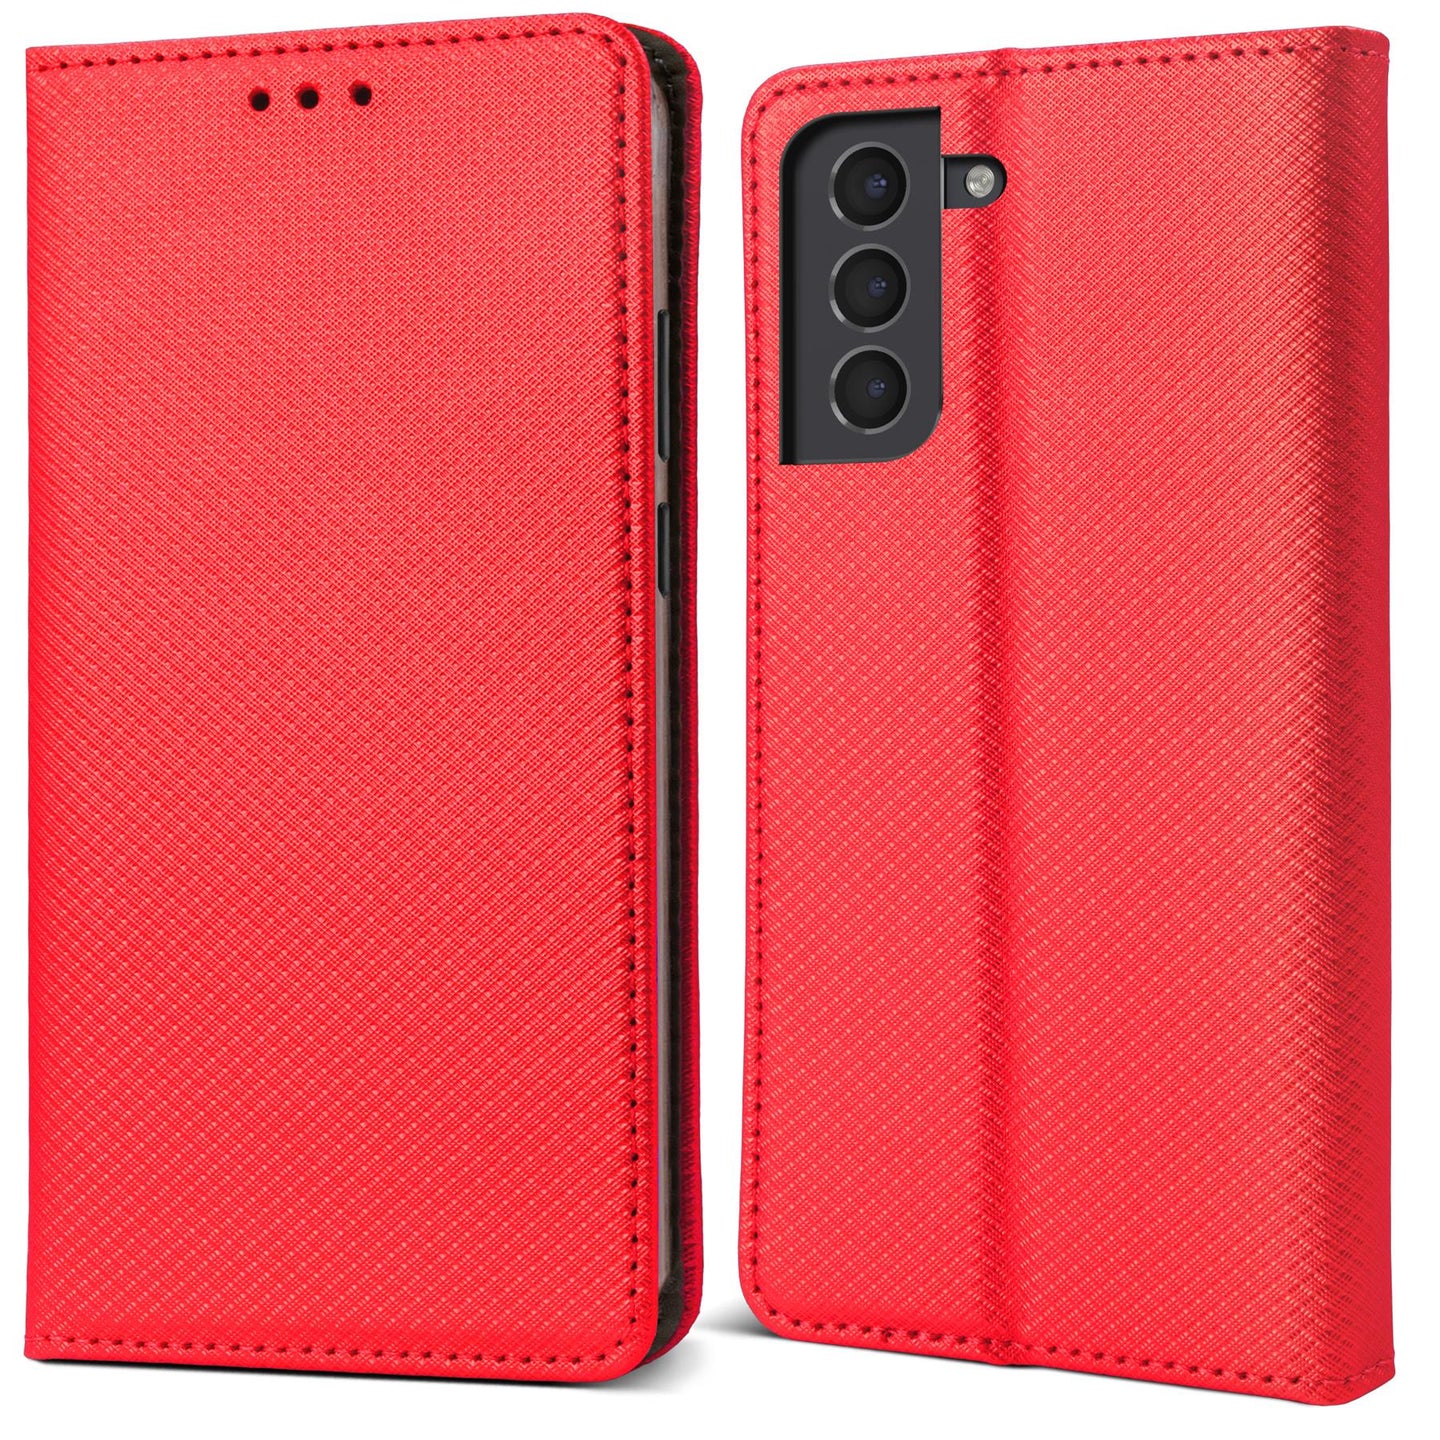 Moozy Case Flip Cover for Samsung S22, Red - Smart Magnetic Flip Case Flip Folio Wallet Case with Card Holder and Stand, Credit Card Slots, Kickstand Function